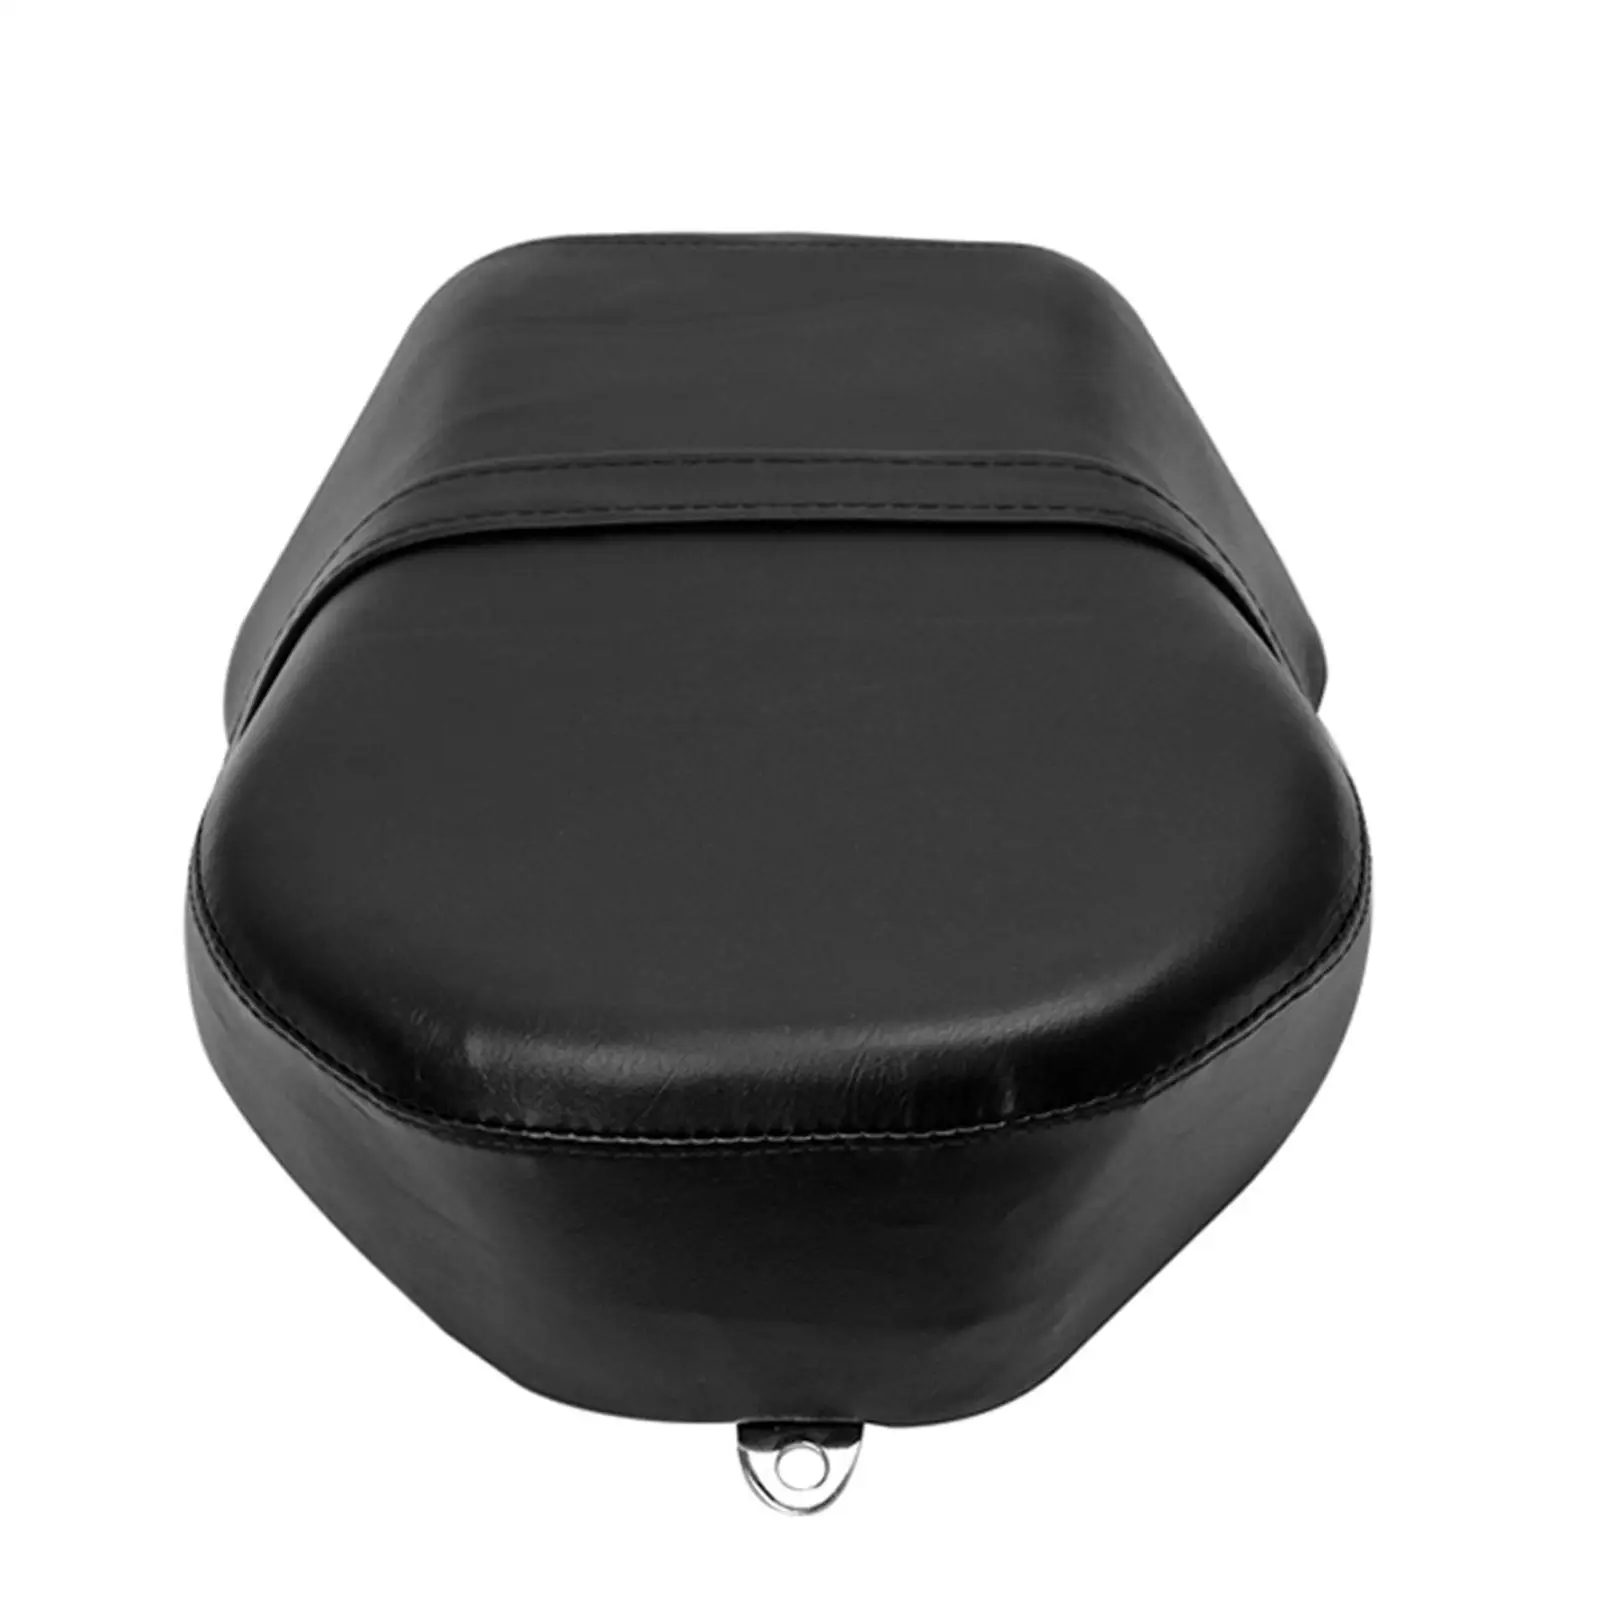 Motorcycle Pillion Passenger Pad Seat Rear Cushion for Harley Sportster 883 1200